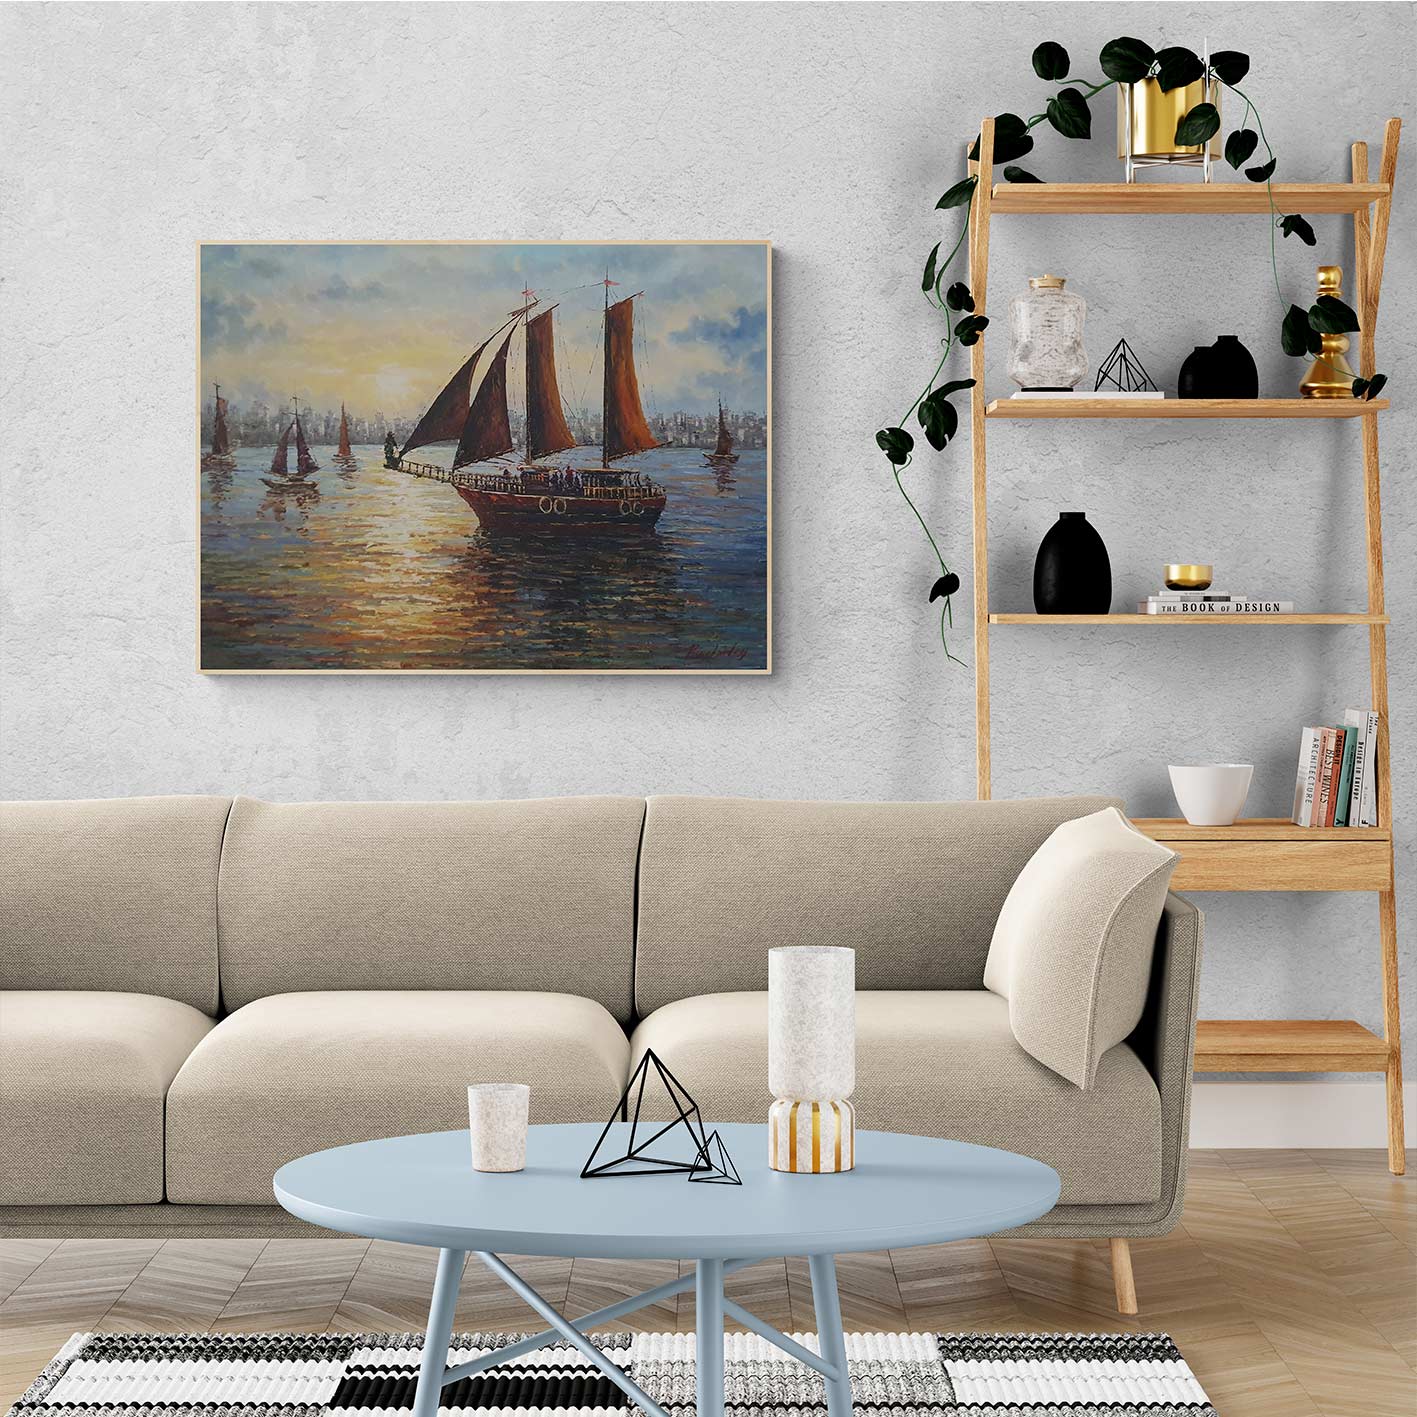 Greatness Boat Painting 120x90 cm